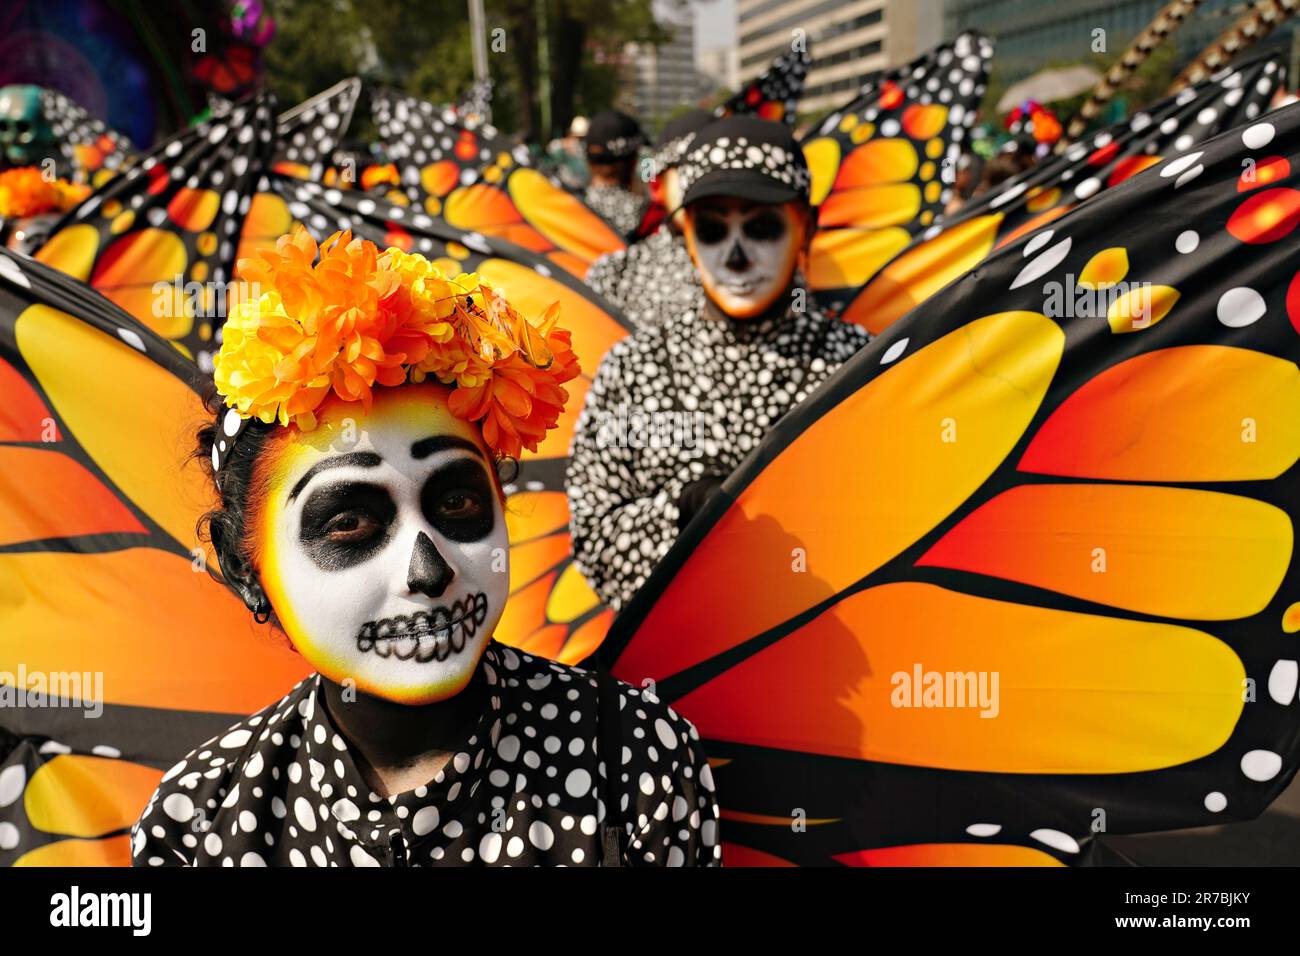 Performers costumed as monarch butterfies march in the Grand Parade to celebrate Dia de los Muertos holiday on Paseo de la Reforma, October 29, 2022 in Mexico City, Mexico. Stock Photo